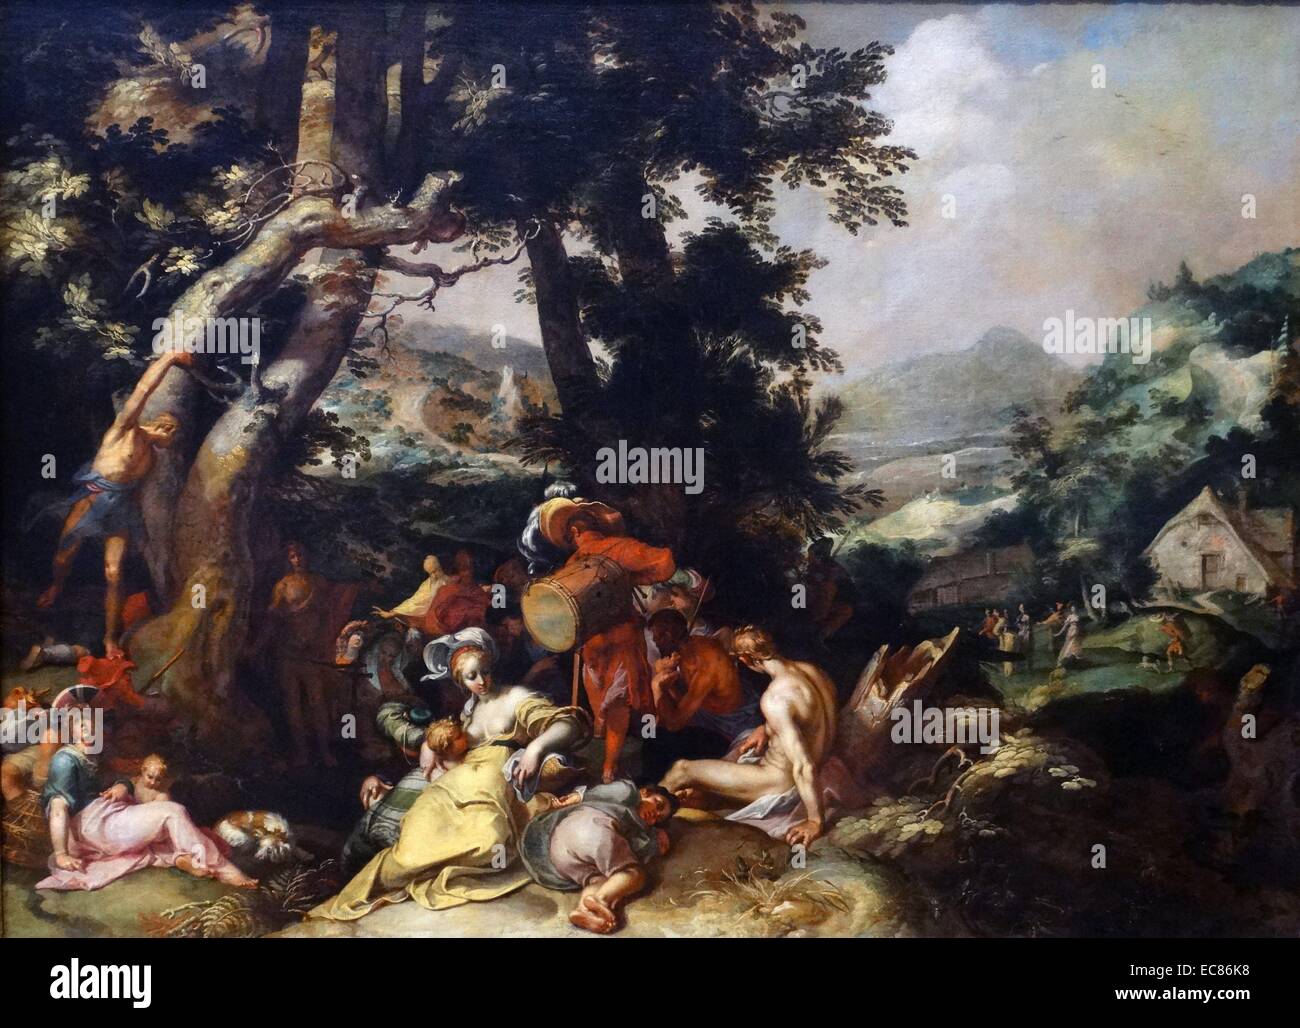 Painting titled 'The Preaching of Saint John the Baptist' painted by Abraham Bloemaert (1564-1651) Dutch painter. Dated 17th Century Stock Photo